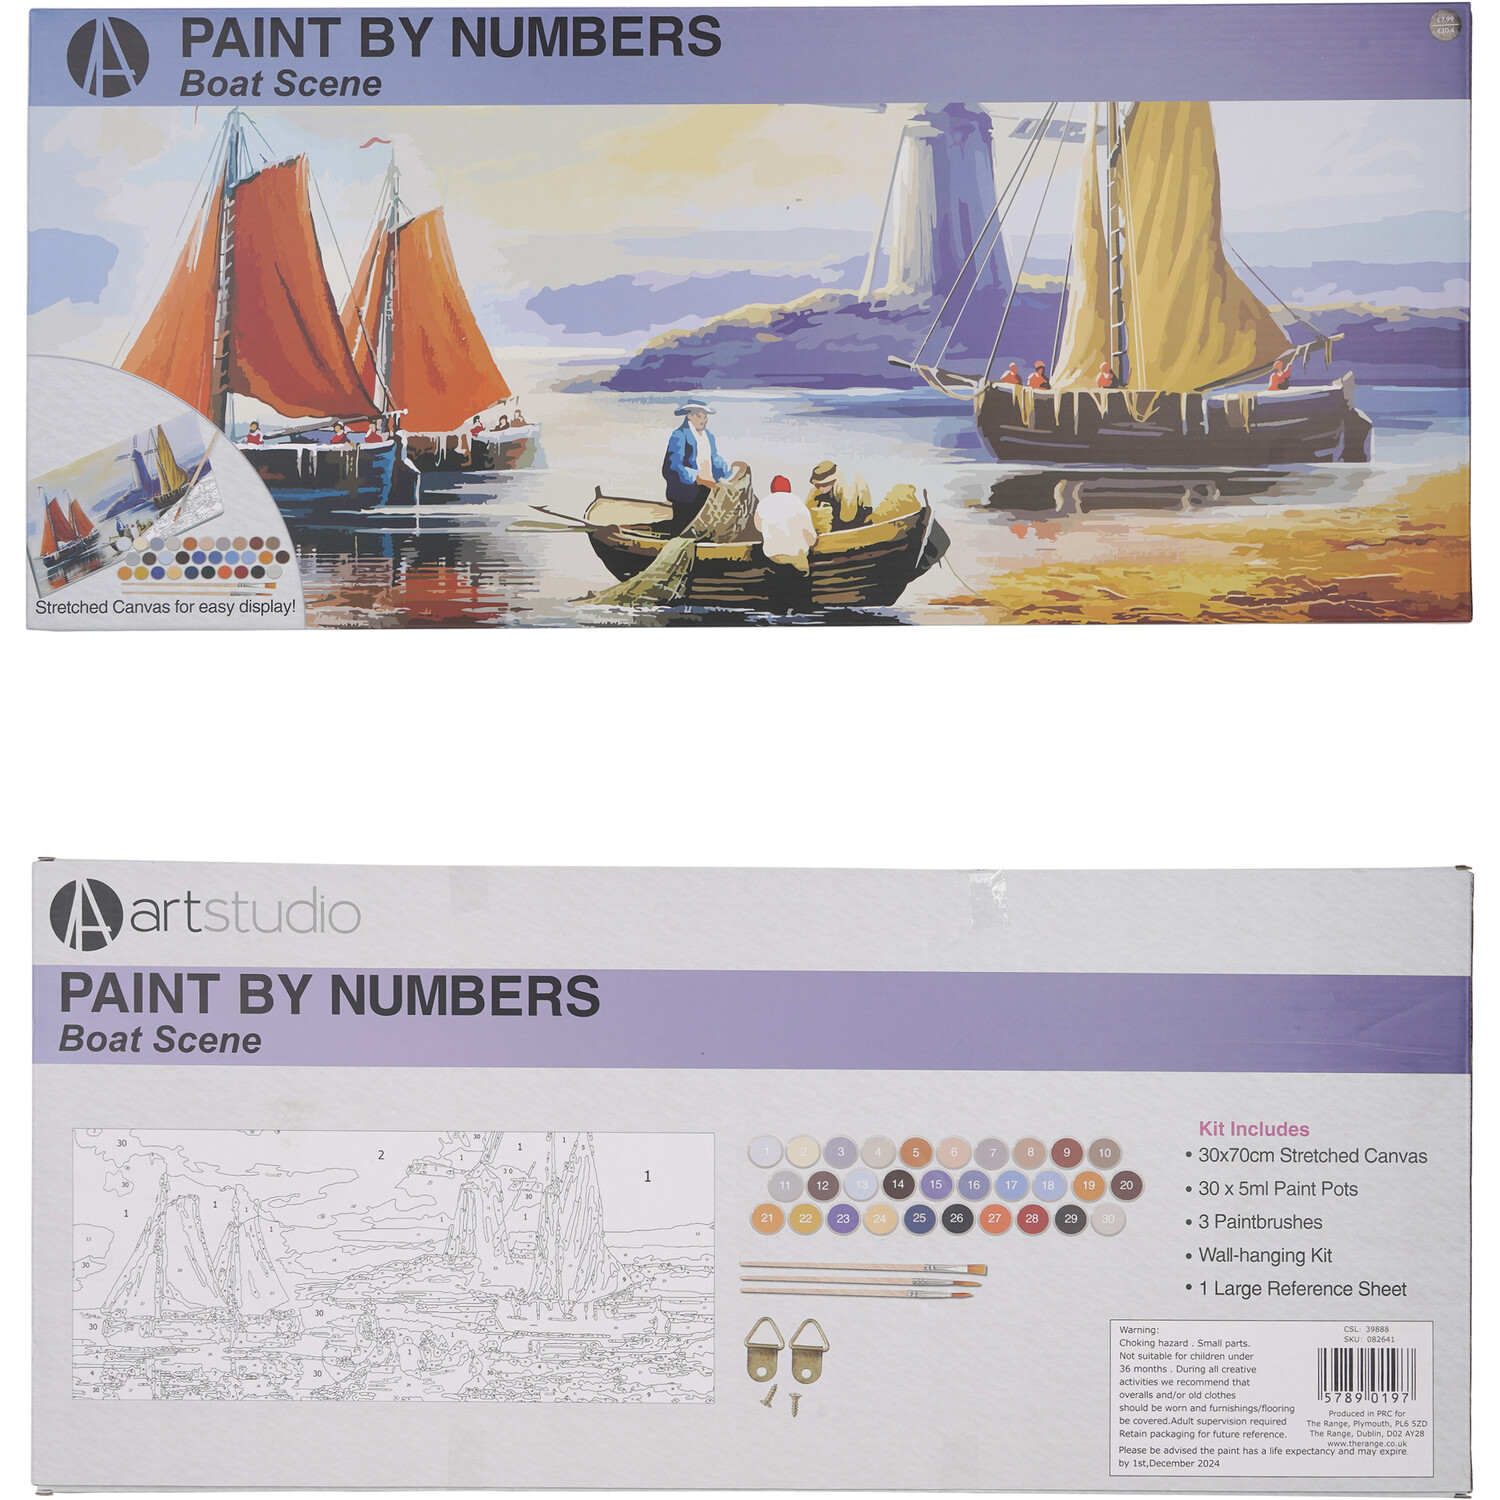 Paint by Numbers Boat Scene Image 2